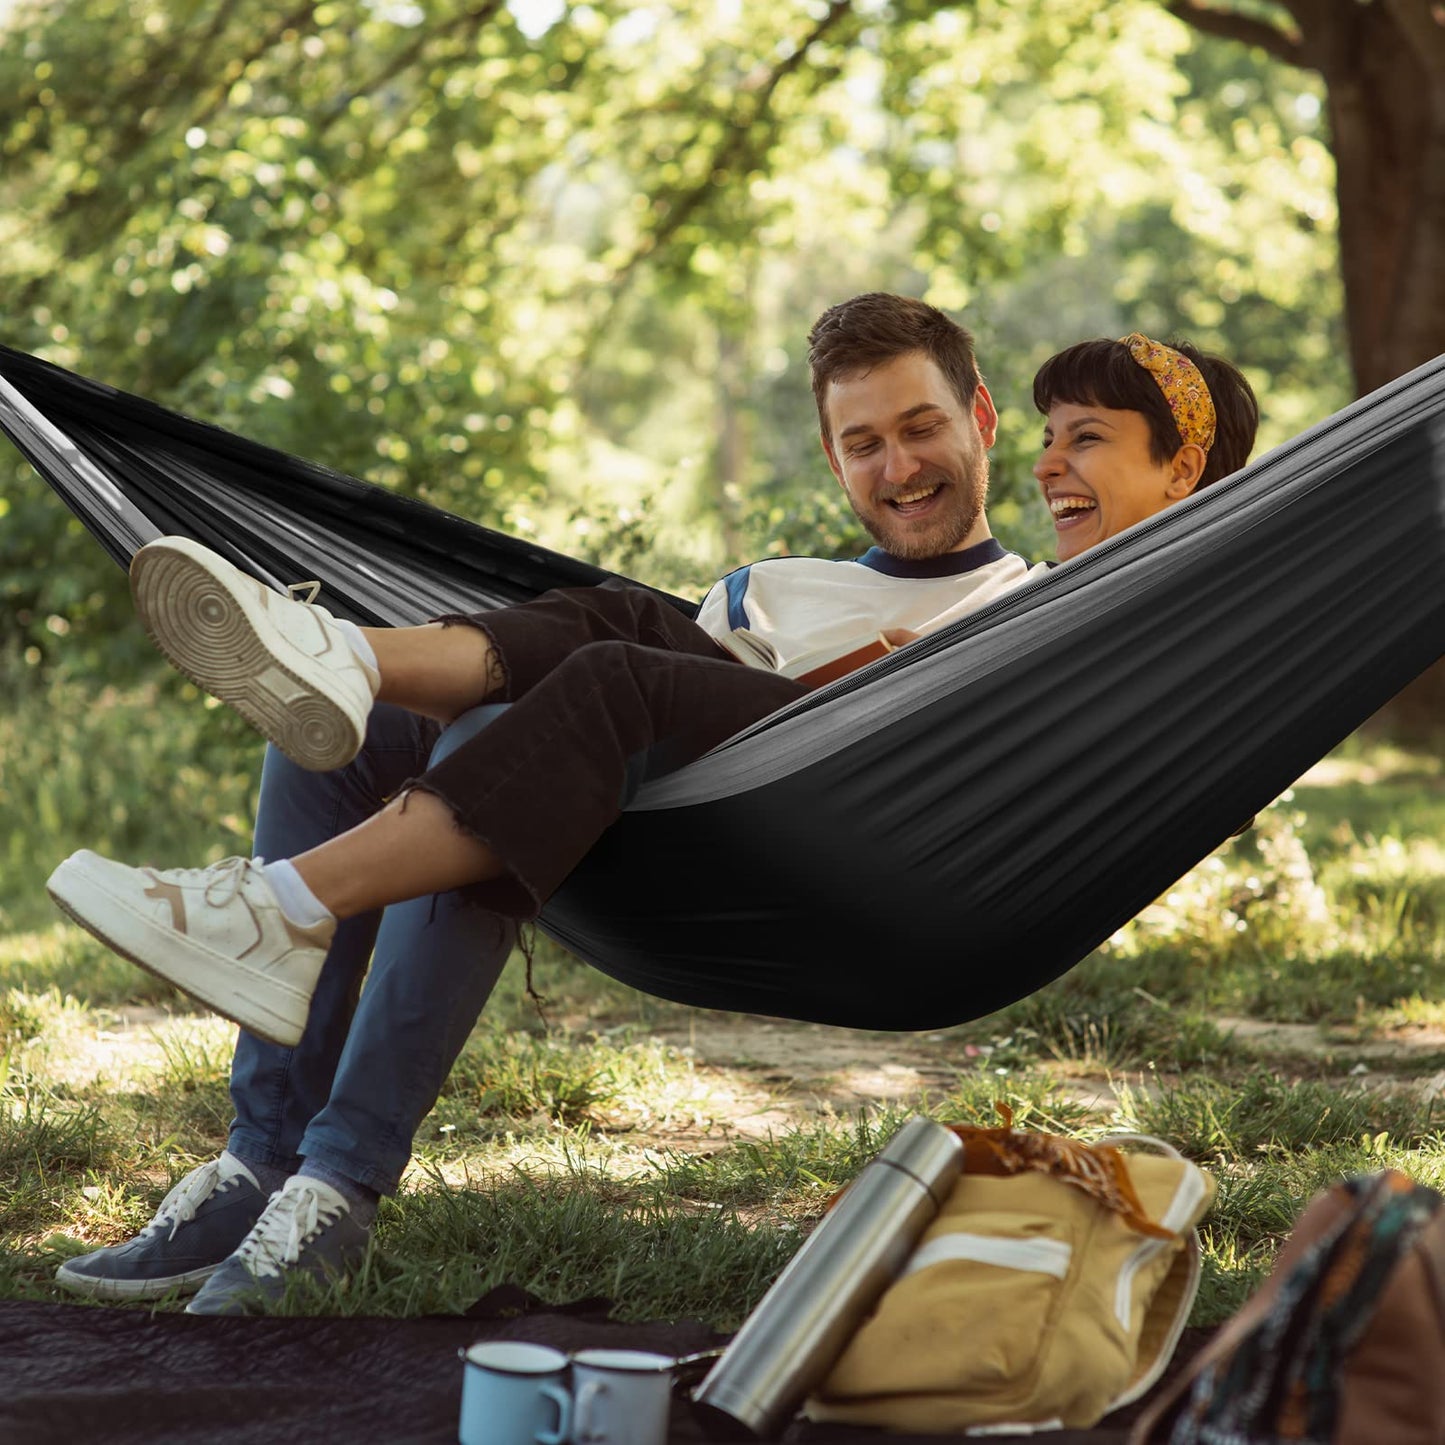 G4Free Camping Hammock with Net and Rain Fly